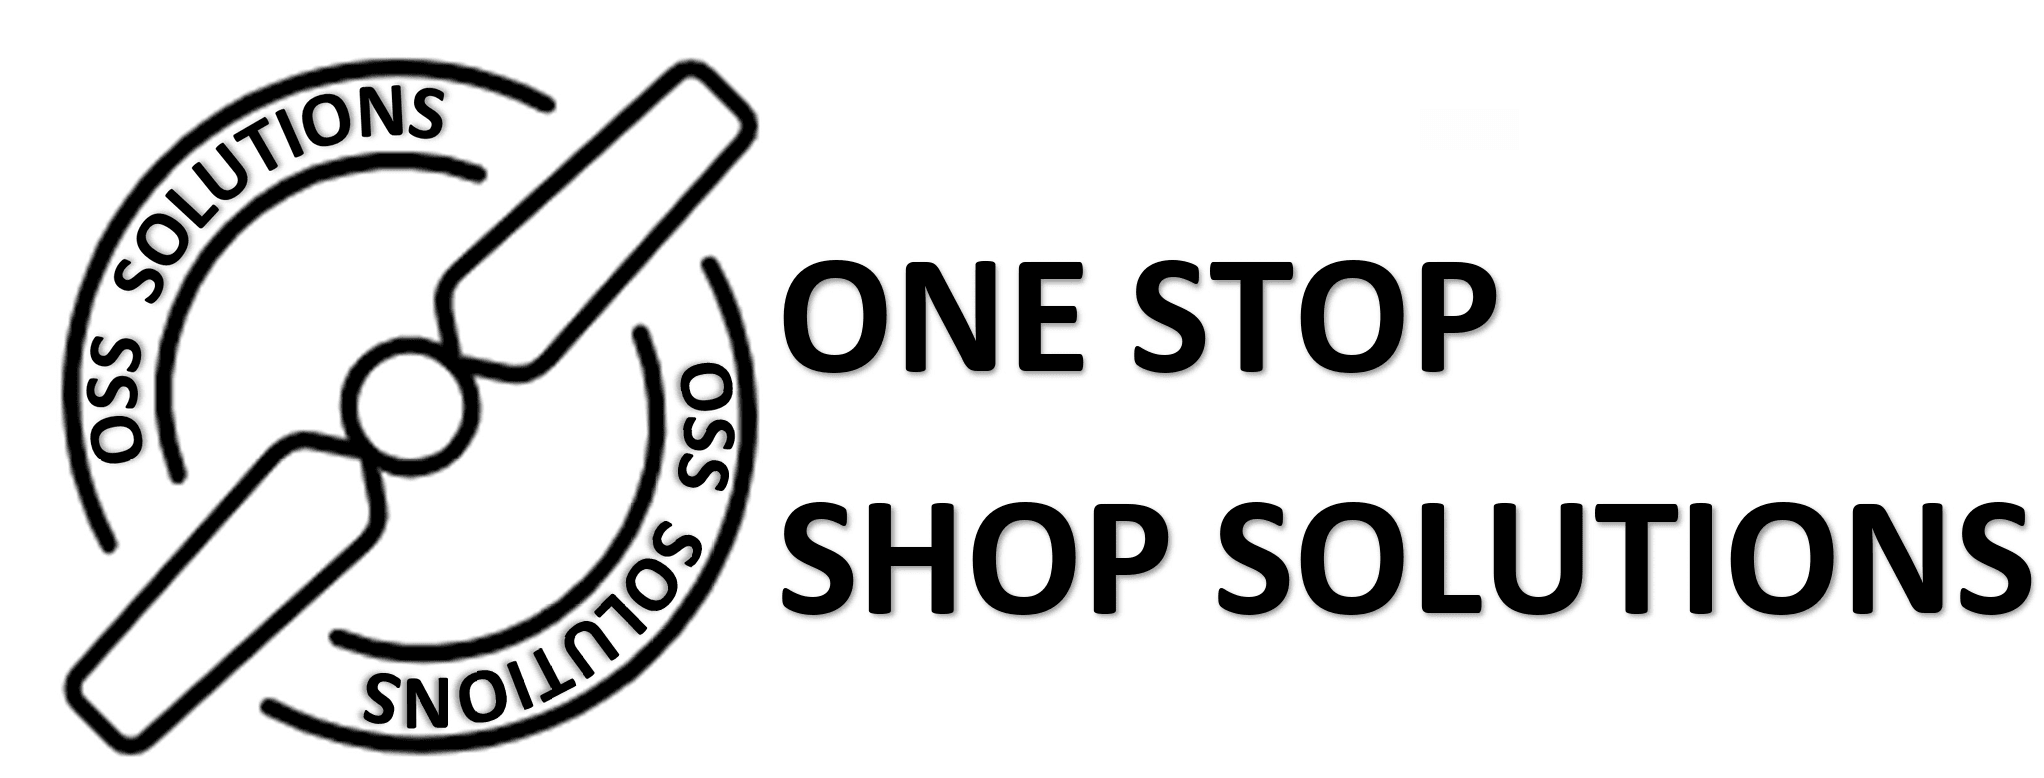 One Stop Shop Solutions